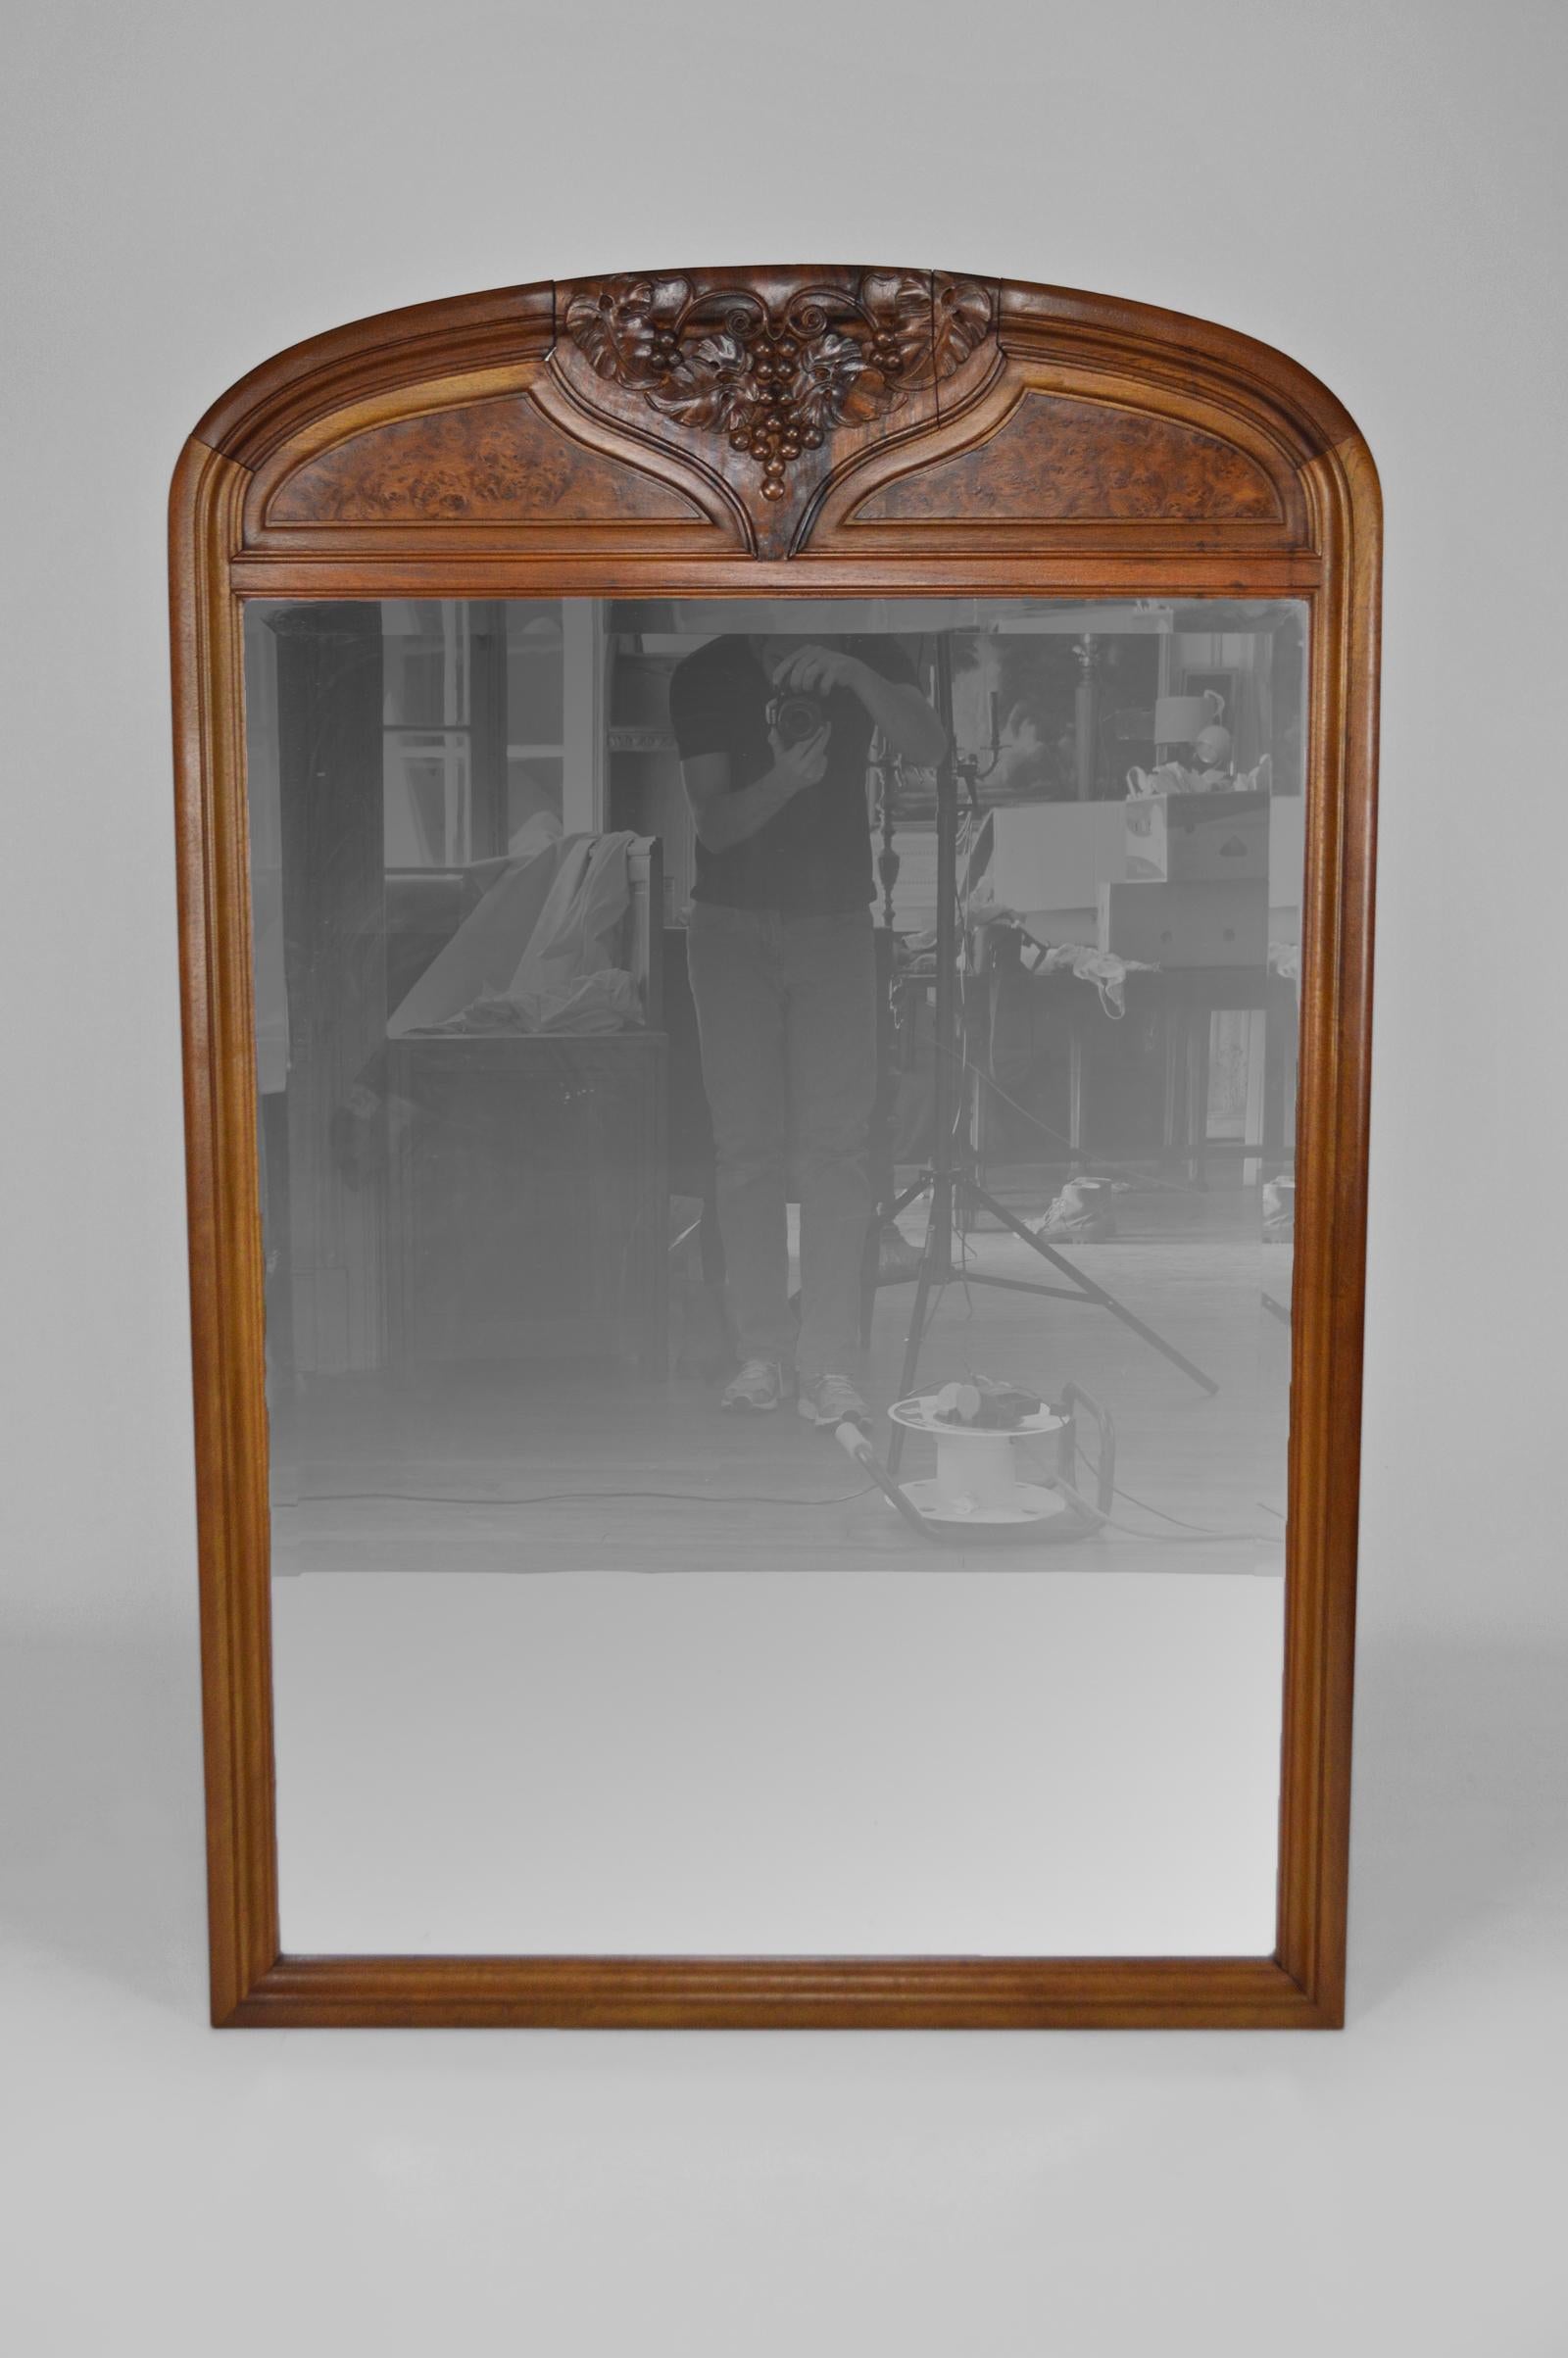 Superb fireplace / mantel mirror in carved walnut wood and burl.
Carved on the theme of the vine.
Beveled mirror.

Art Nouveau.
France, circa 1905.

Unsigned.
In the style of productions from the same period by Gauthier-Poinsignon, Georges